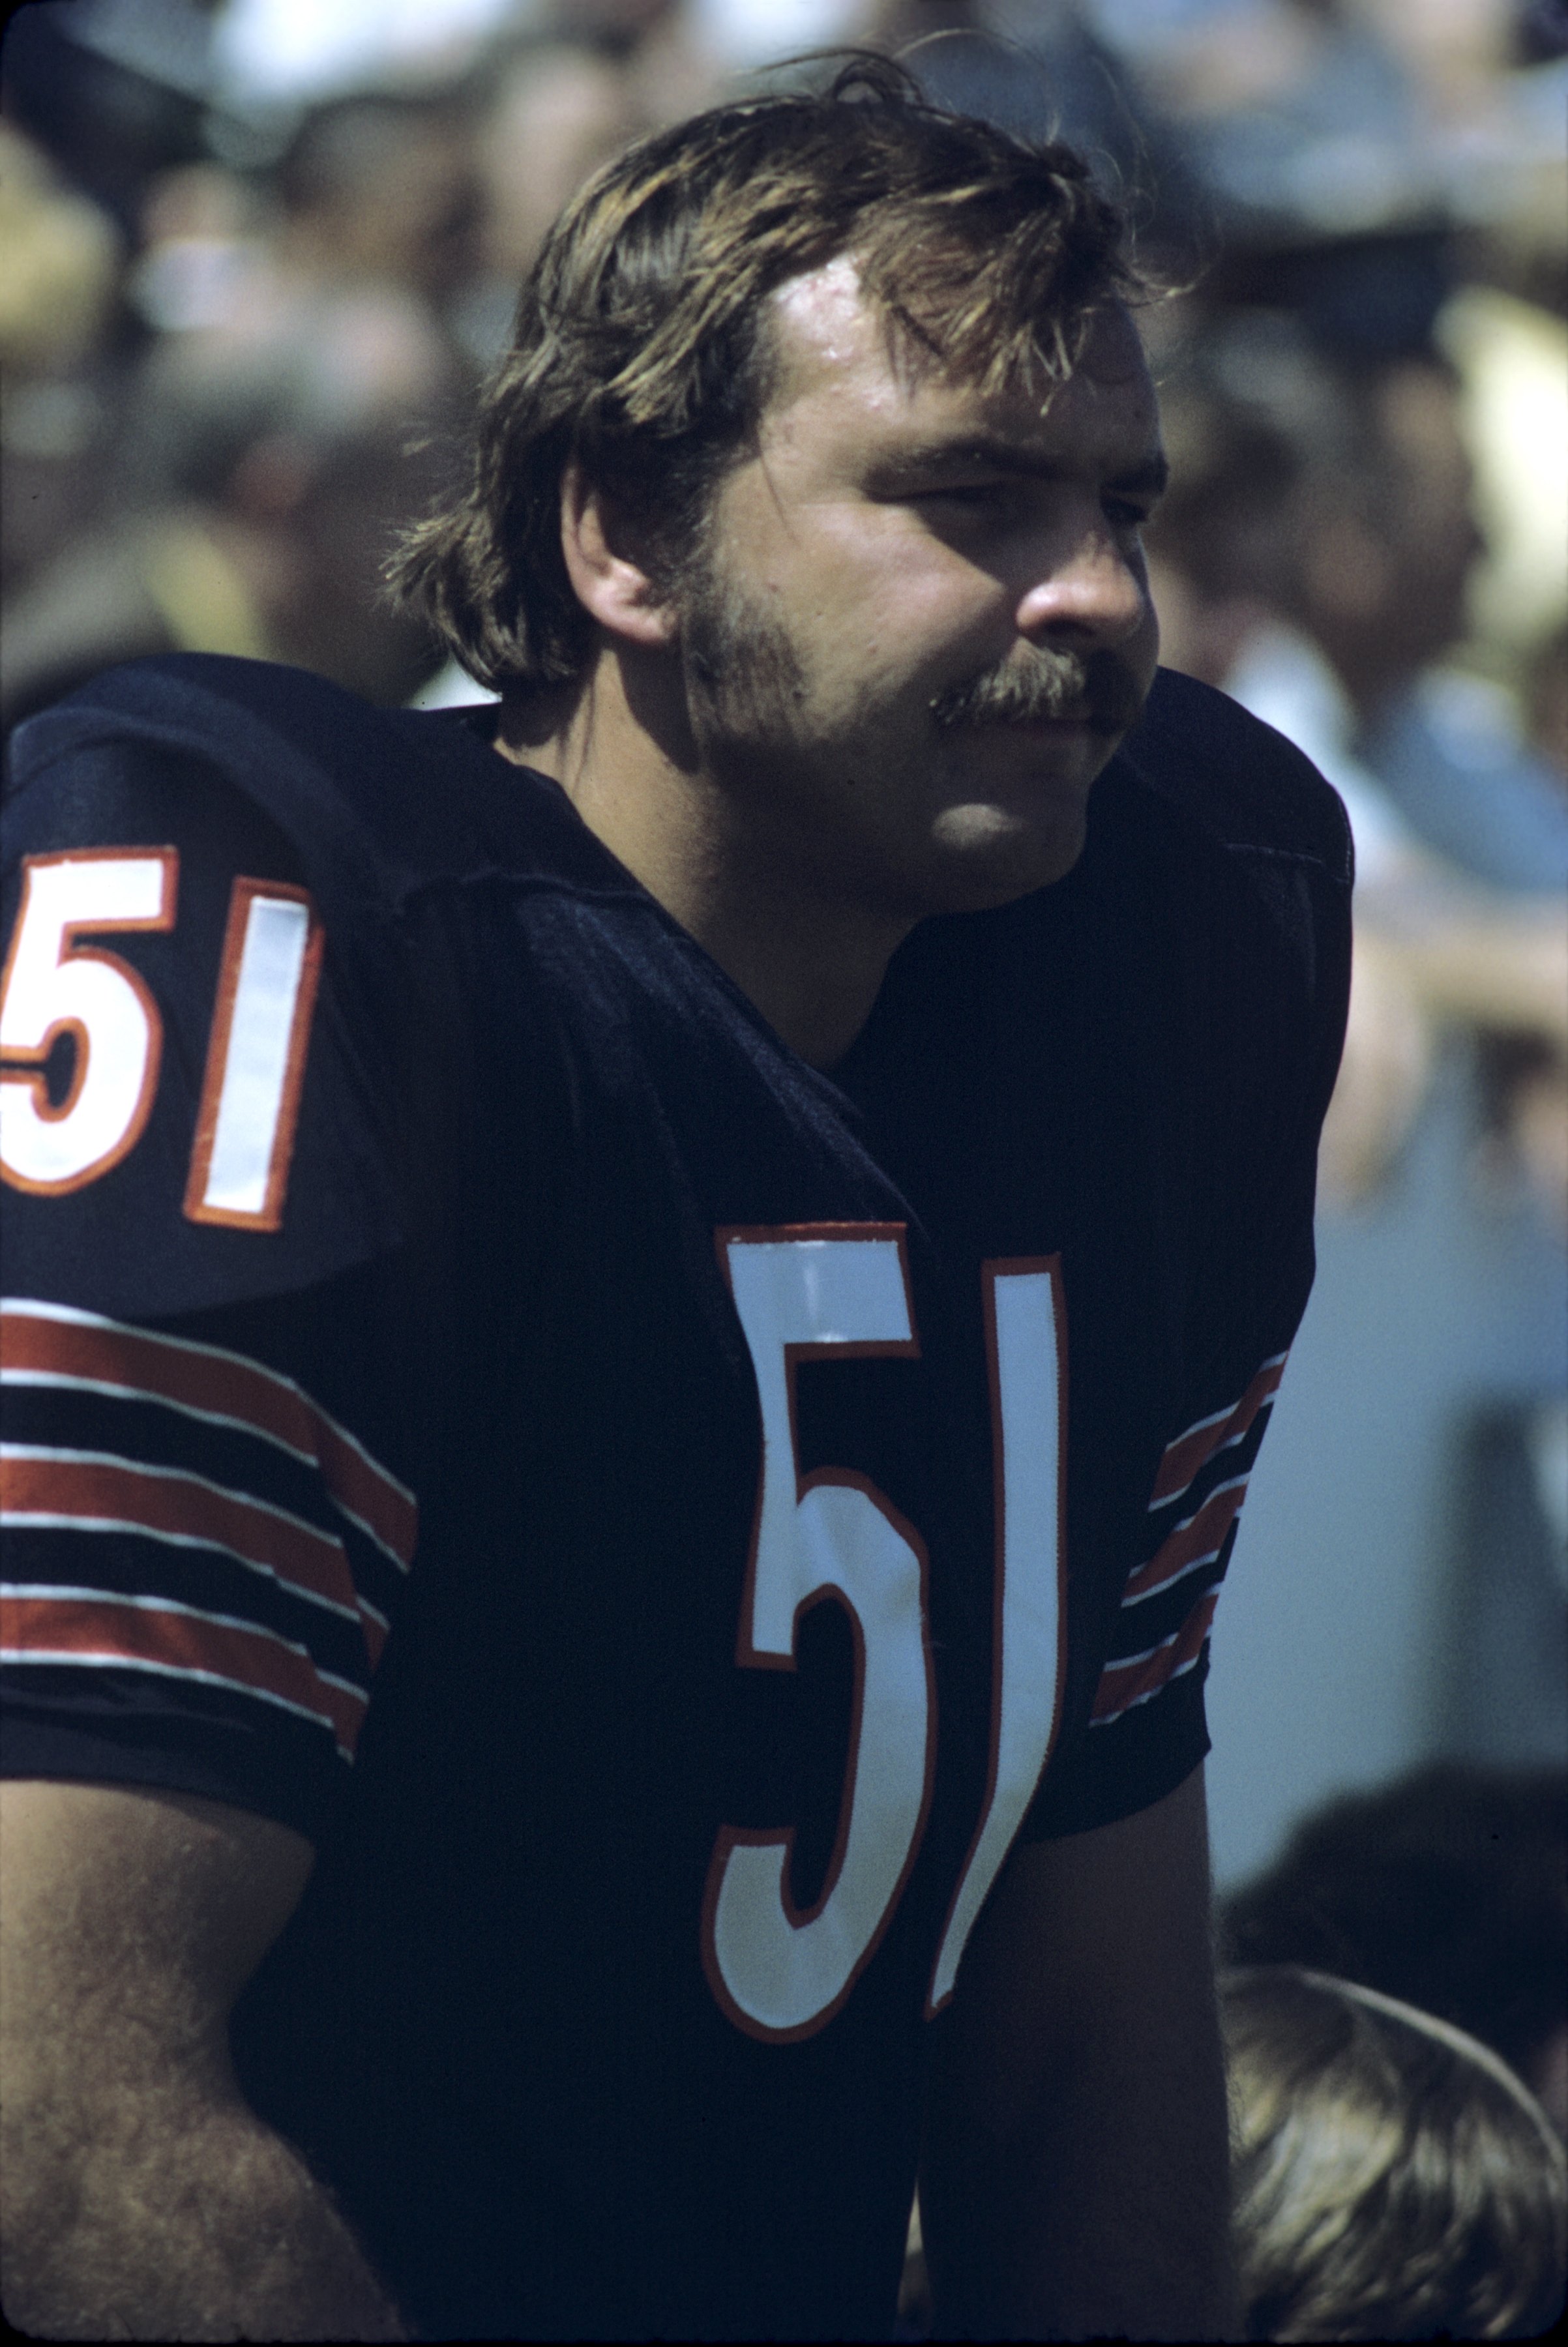 Dick Butkus during a preseason game on August 28, 1971 at Soldier Field in Chicago, Ilinois | Sources: Getty Images